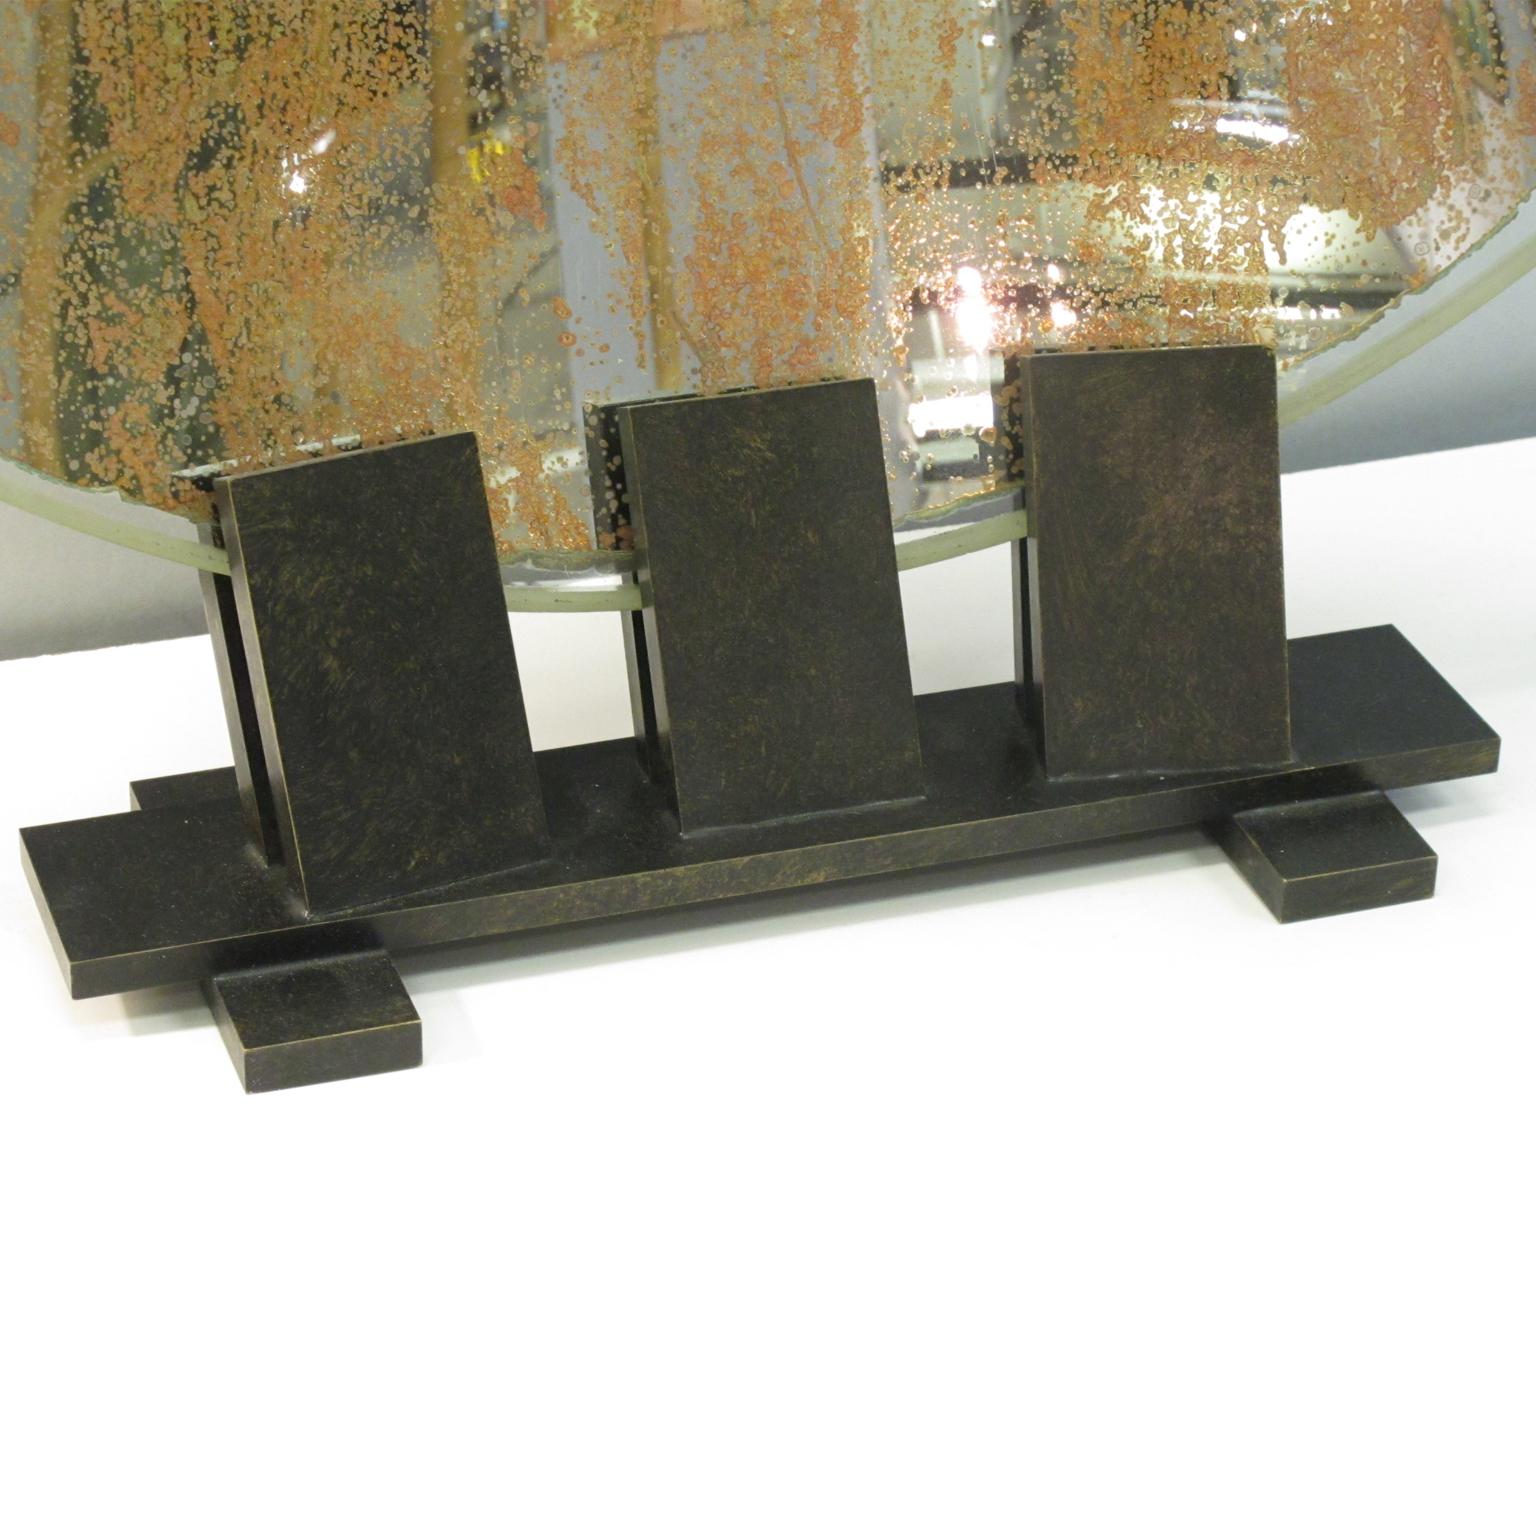 Rare large lighthouse mirrored optic lens sculpture mounted on a custom-made pedestal. Huge Industrial concave mirror used in a lighthouse in France in the early 20th Century. Solid brass with aged patina custom-made base. This interesting piece